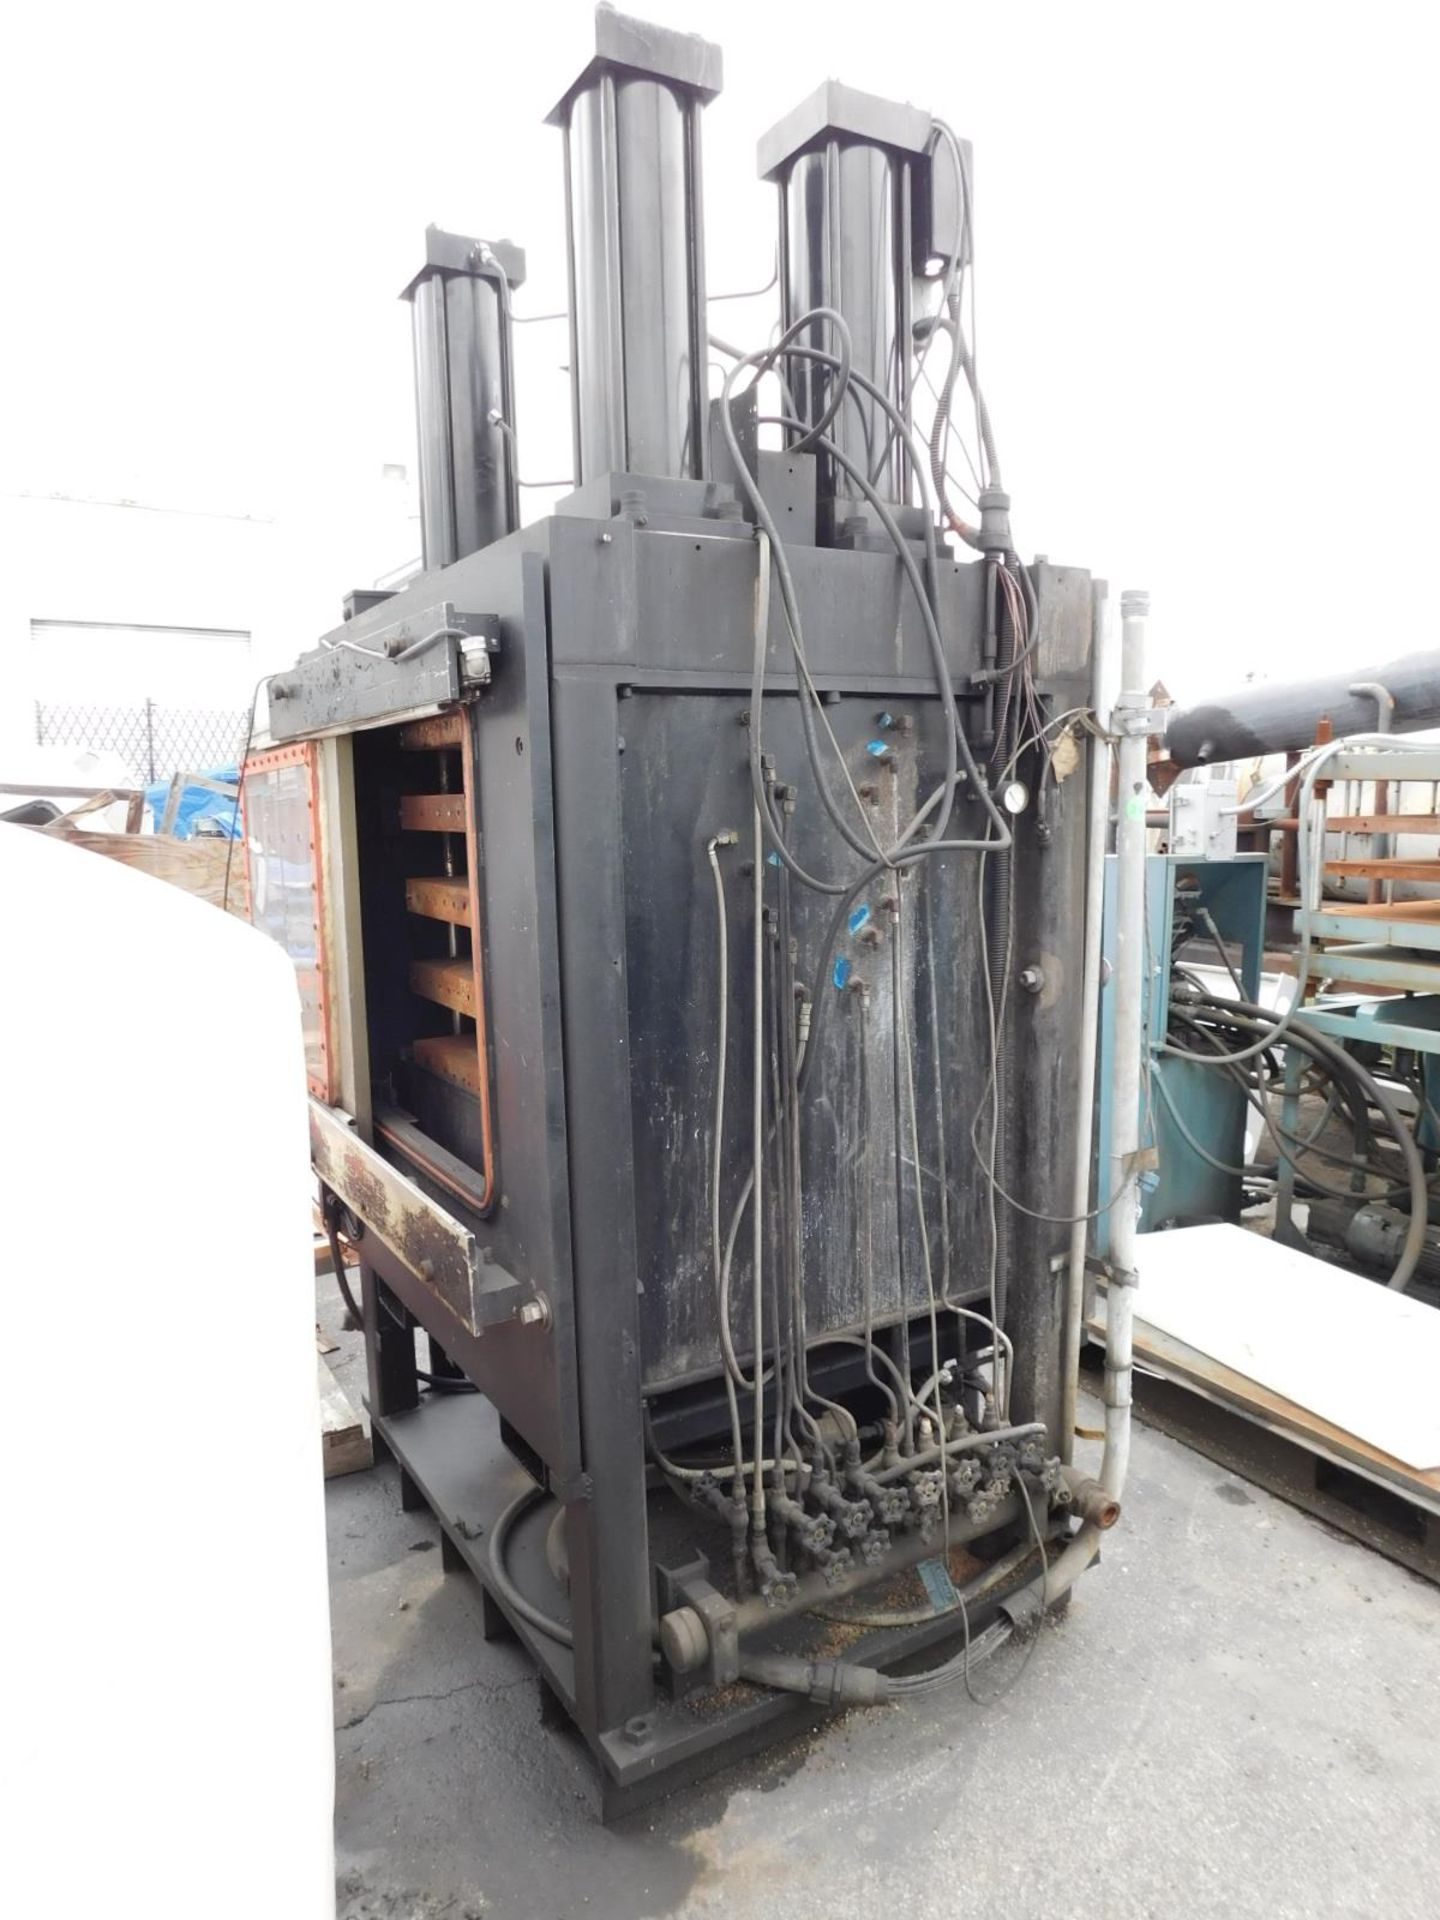 OEM 100-TON PRESS, REBUILDABLE, 4 OPENING, 32" X 26-1/2" PLATEN SIZE - Image 2 of 3